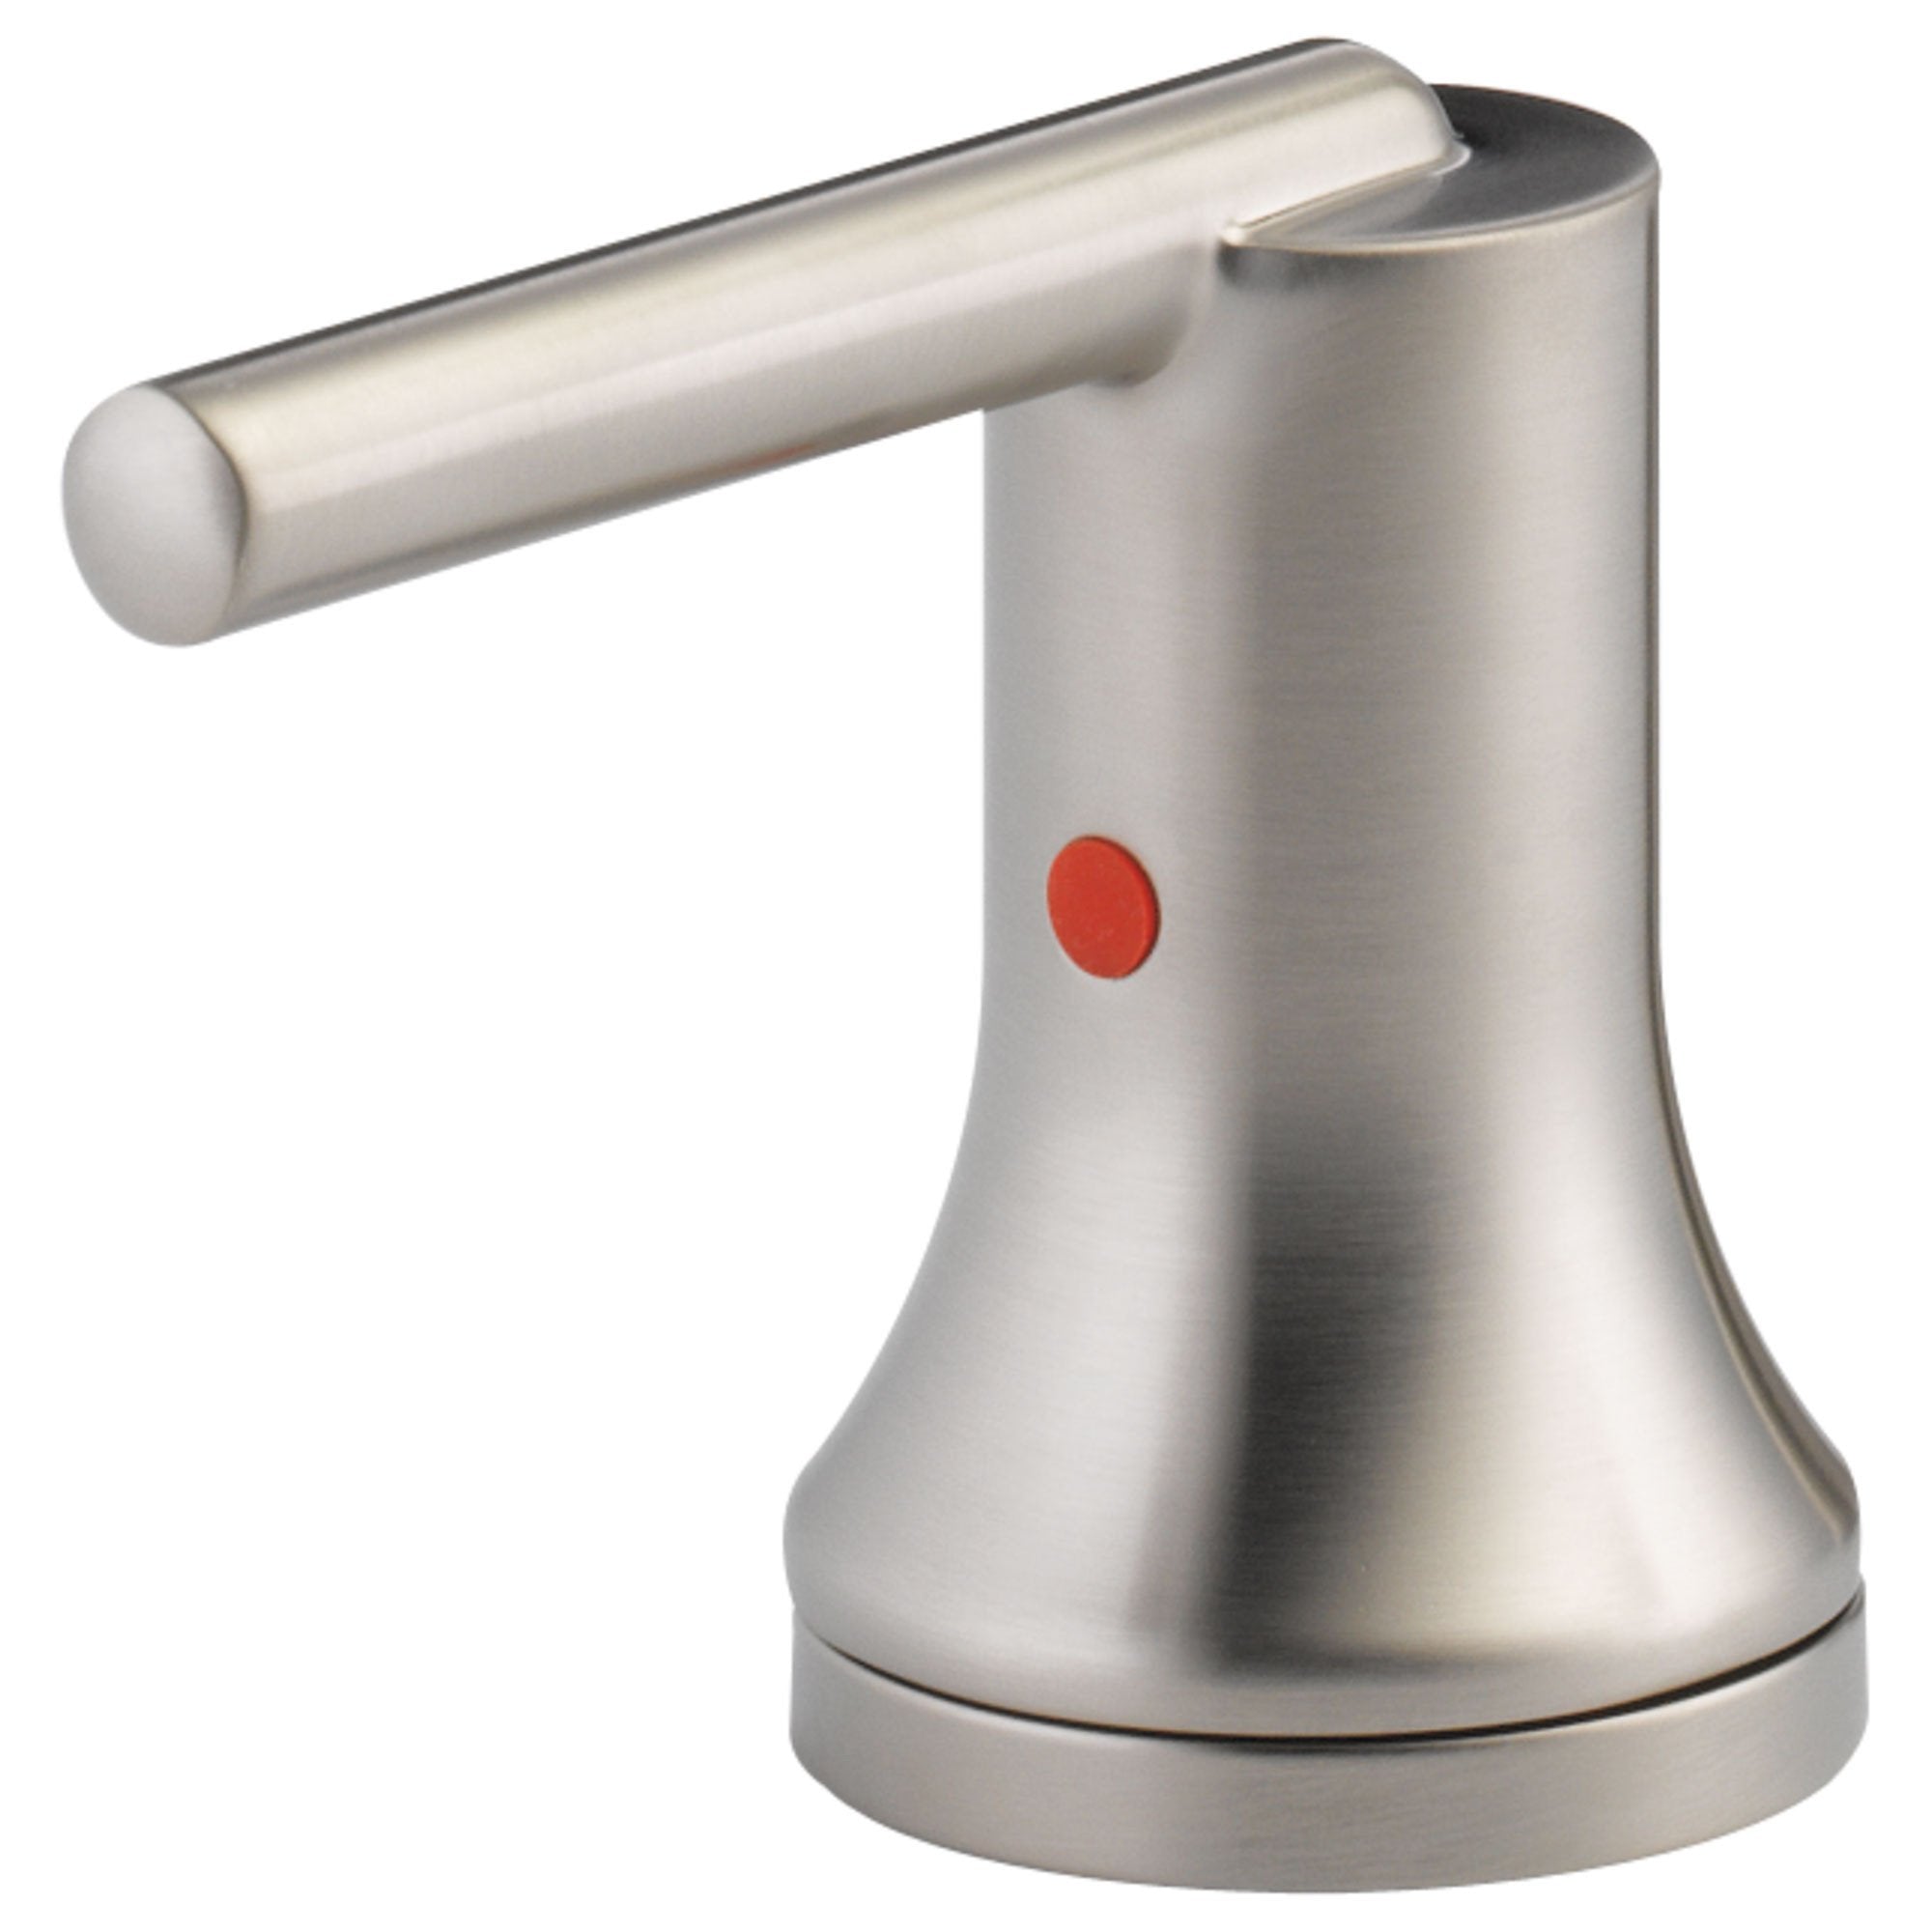 Delta Trinsic Collection Stainless Steel Finish Lavatory Lever Handles - Quantity 2 Included DH259SS